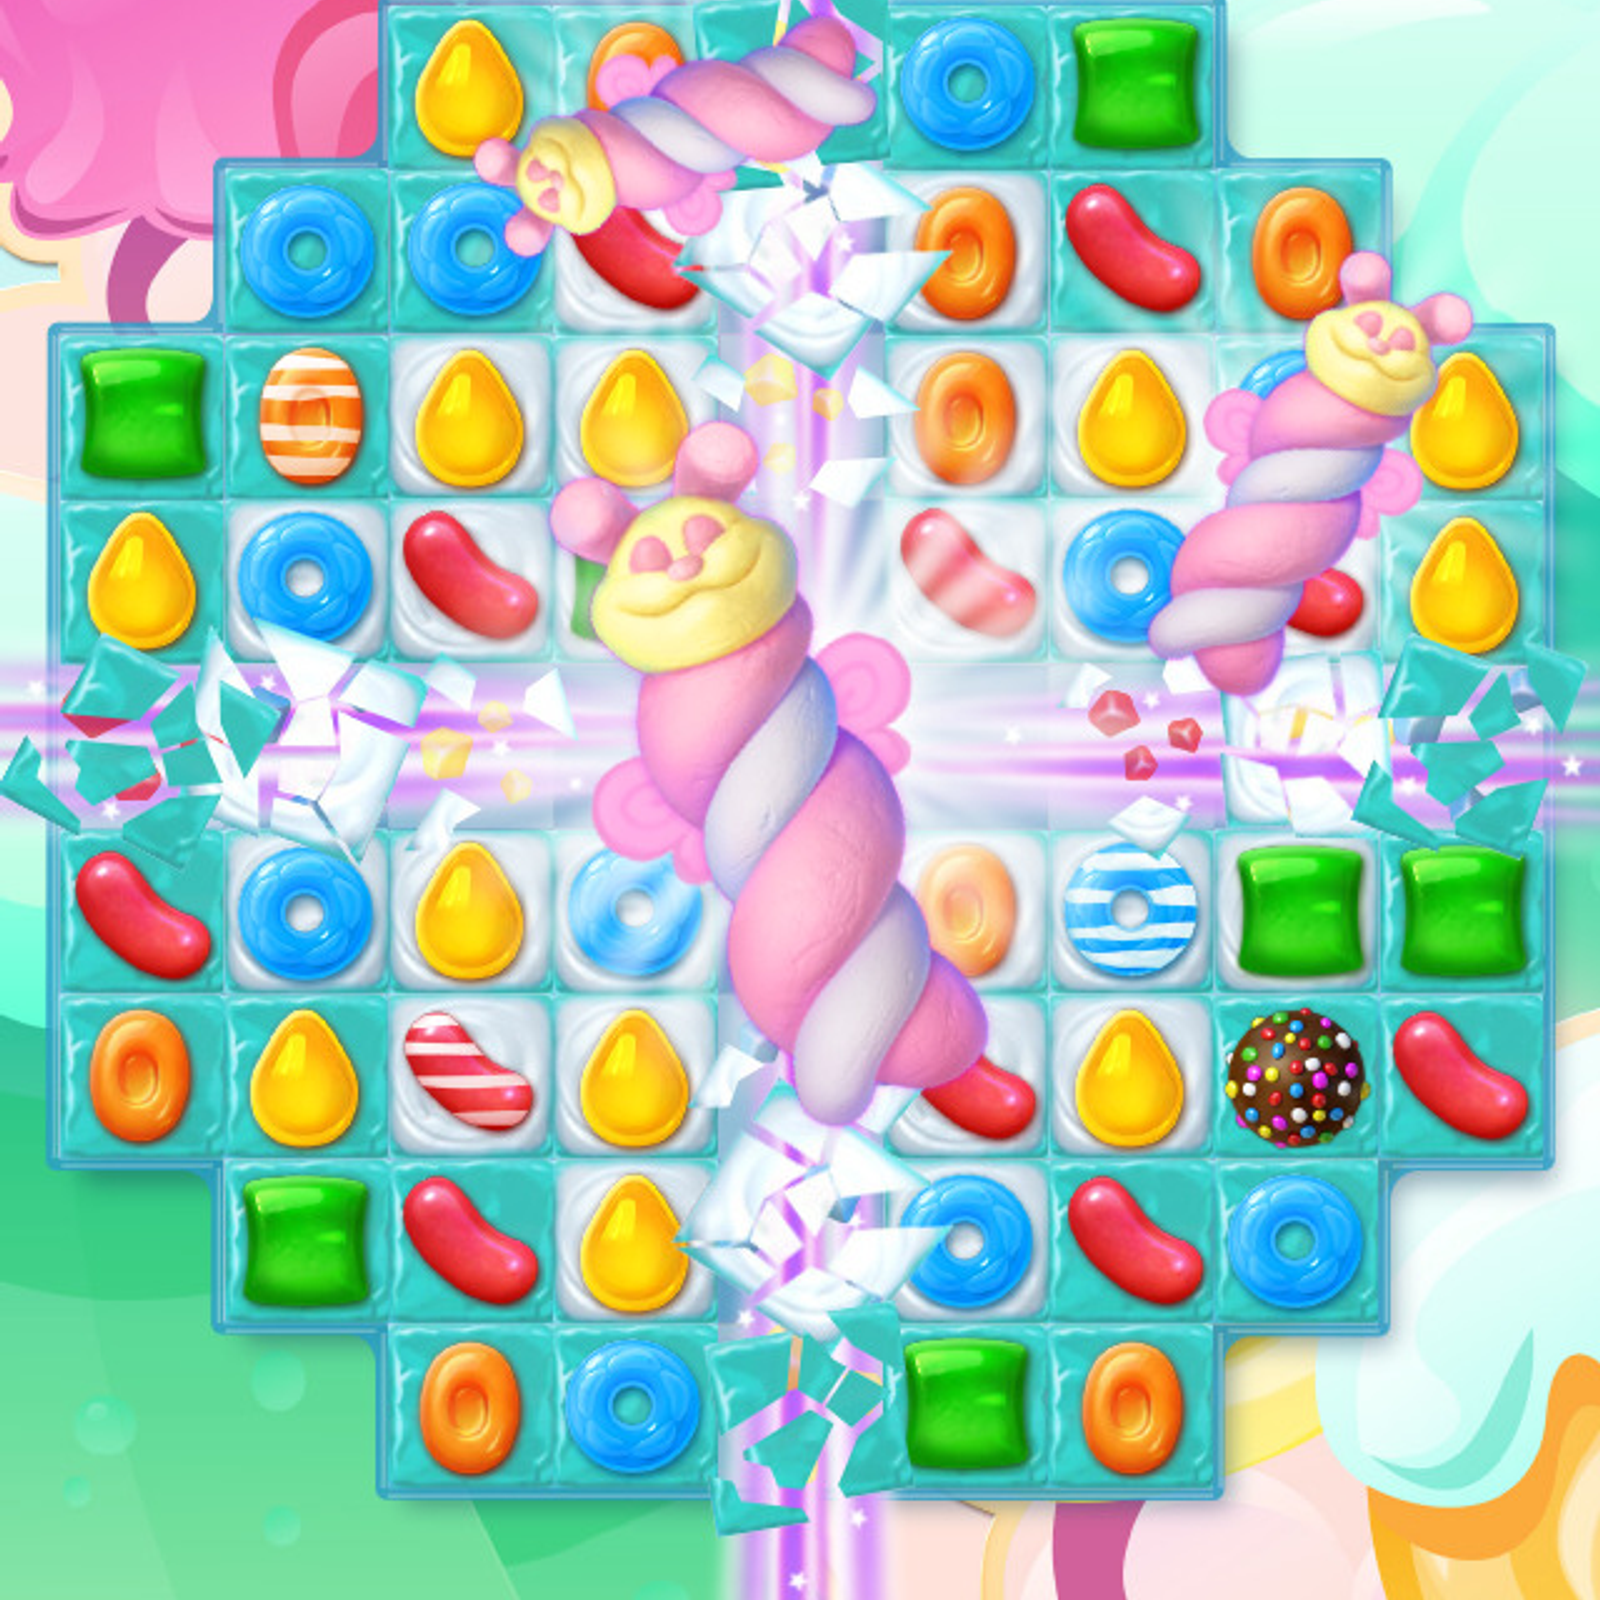 Jelly crush. Candy Crush Jelly Saga. Candy Crush Saga Android. Игра Candy Crush аналоги. Jelly Monster Crush.